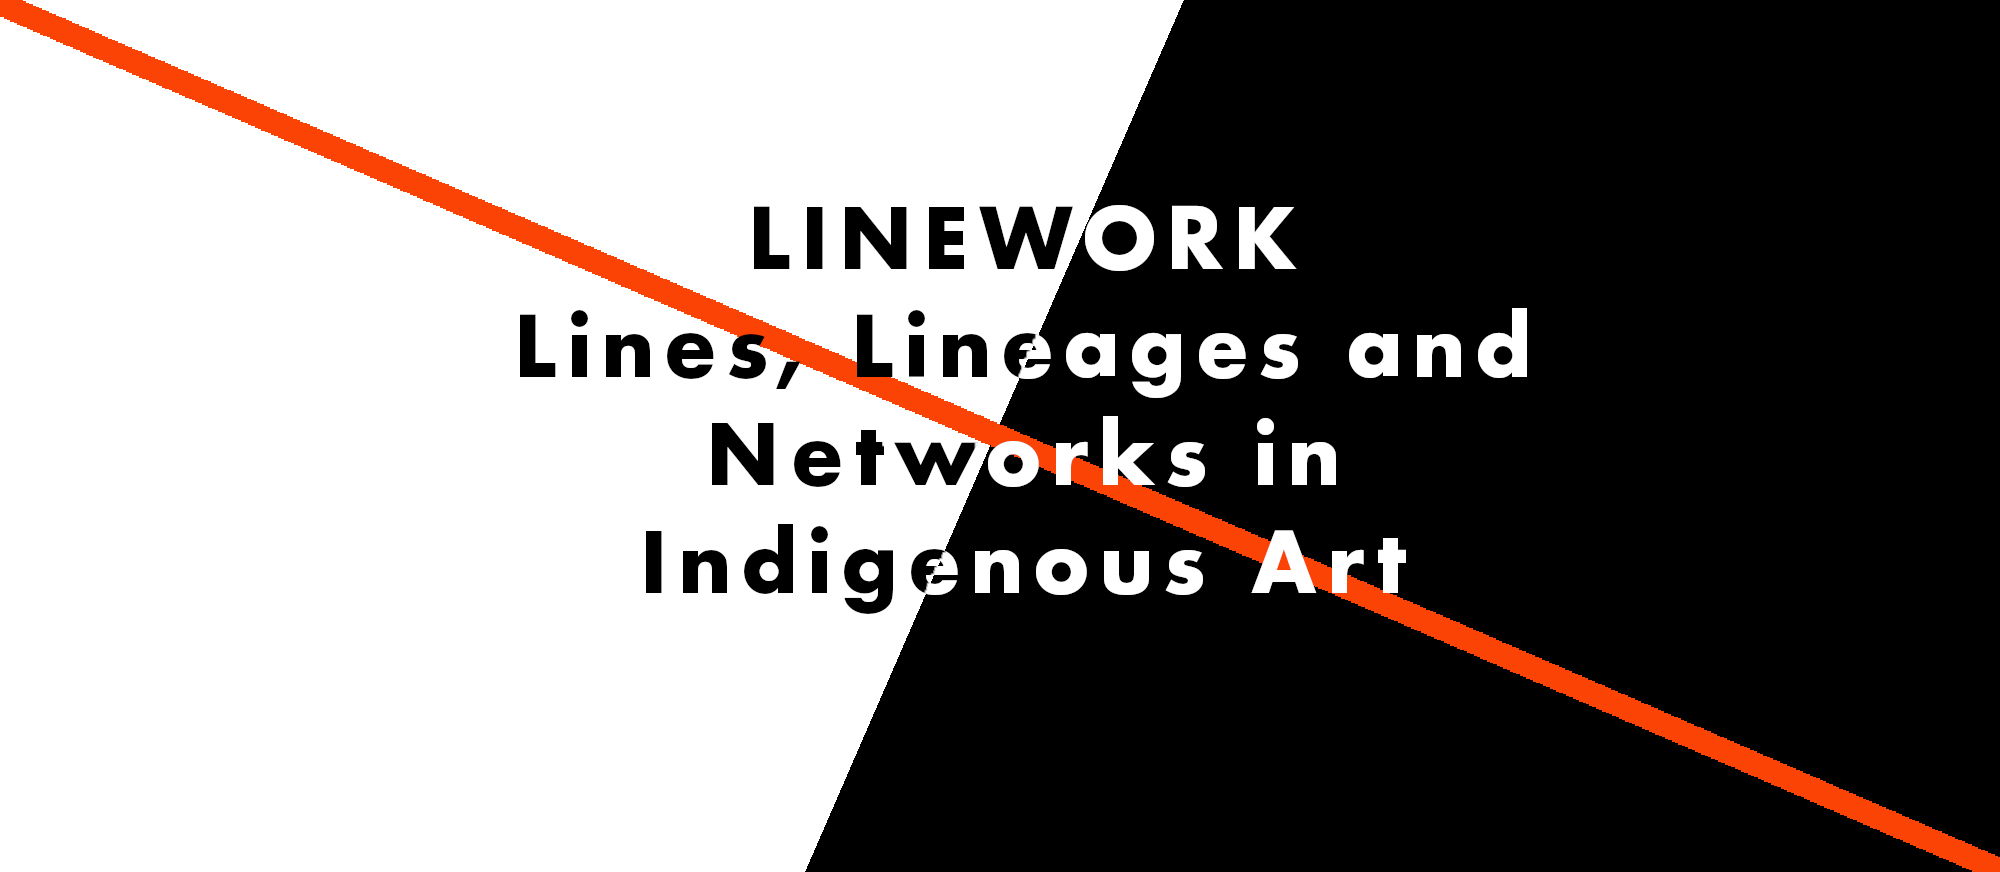 Linework: Lines, Lineages and Networks in Indigenous Art